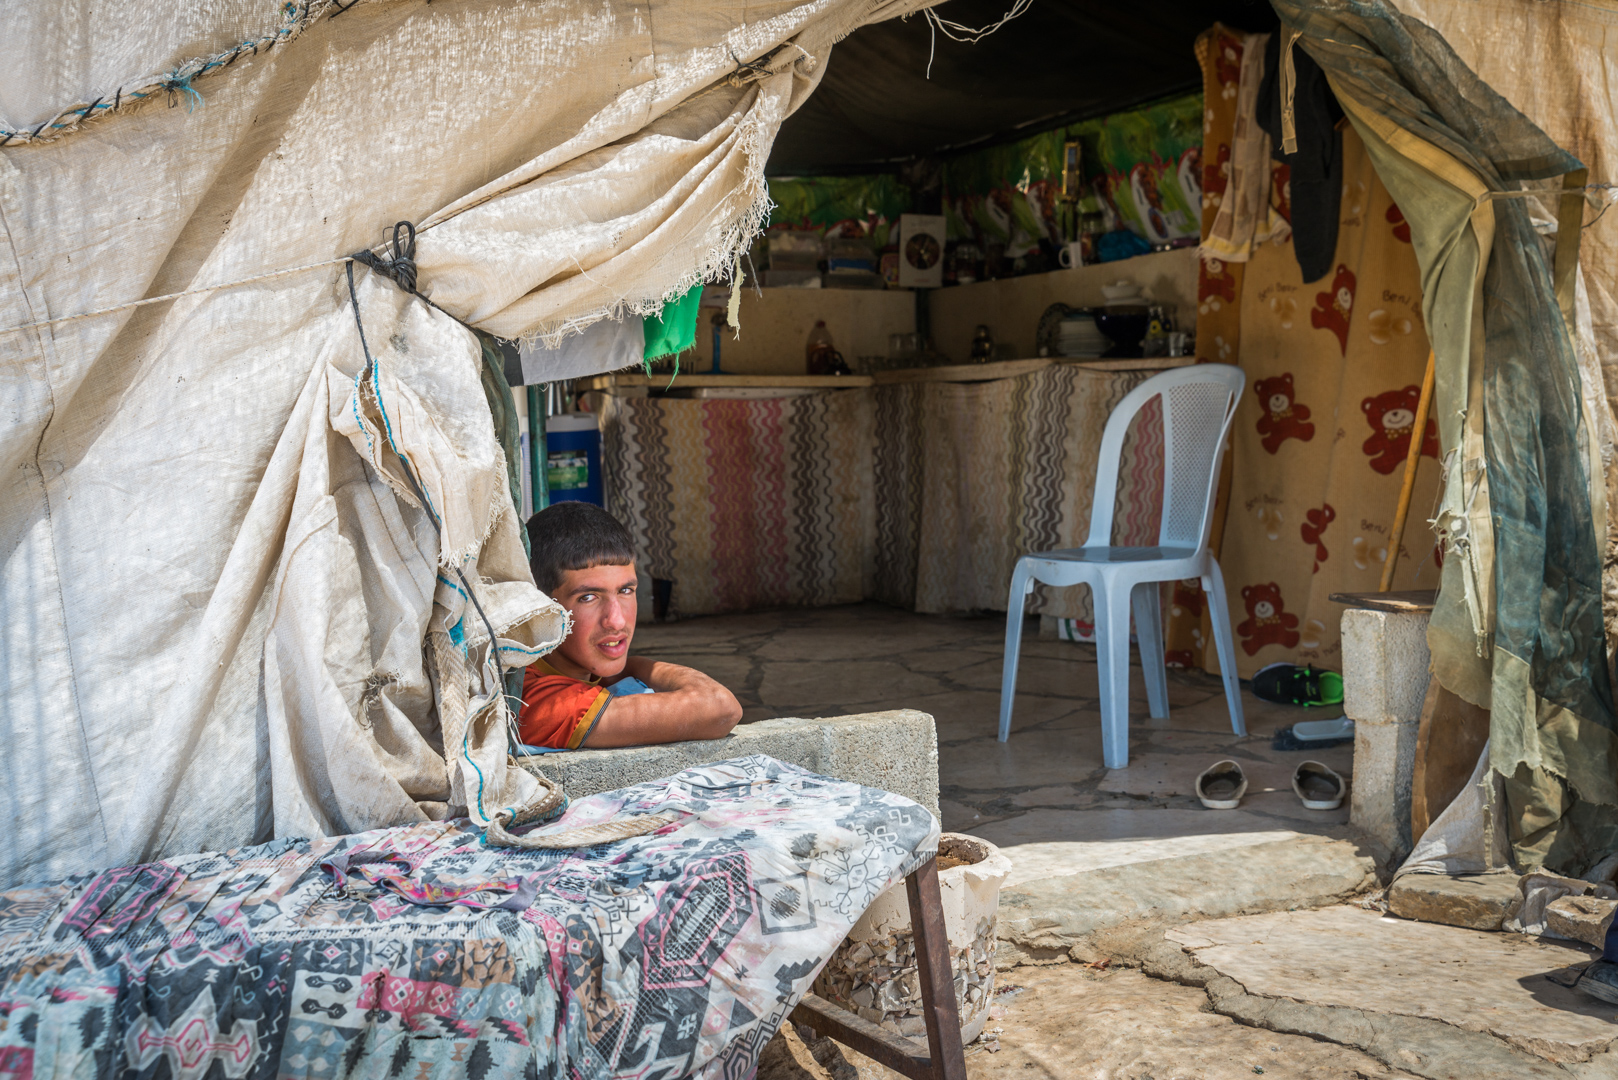 A young Palestinian man sits inside his family's home in Susiya. It is one of the structures due to be demolished by the Israeli army.